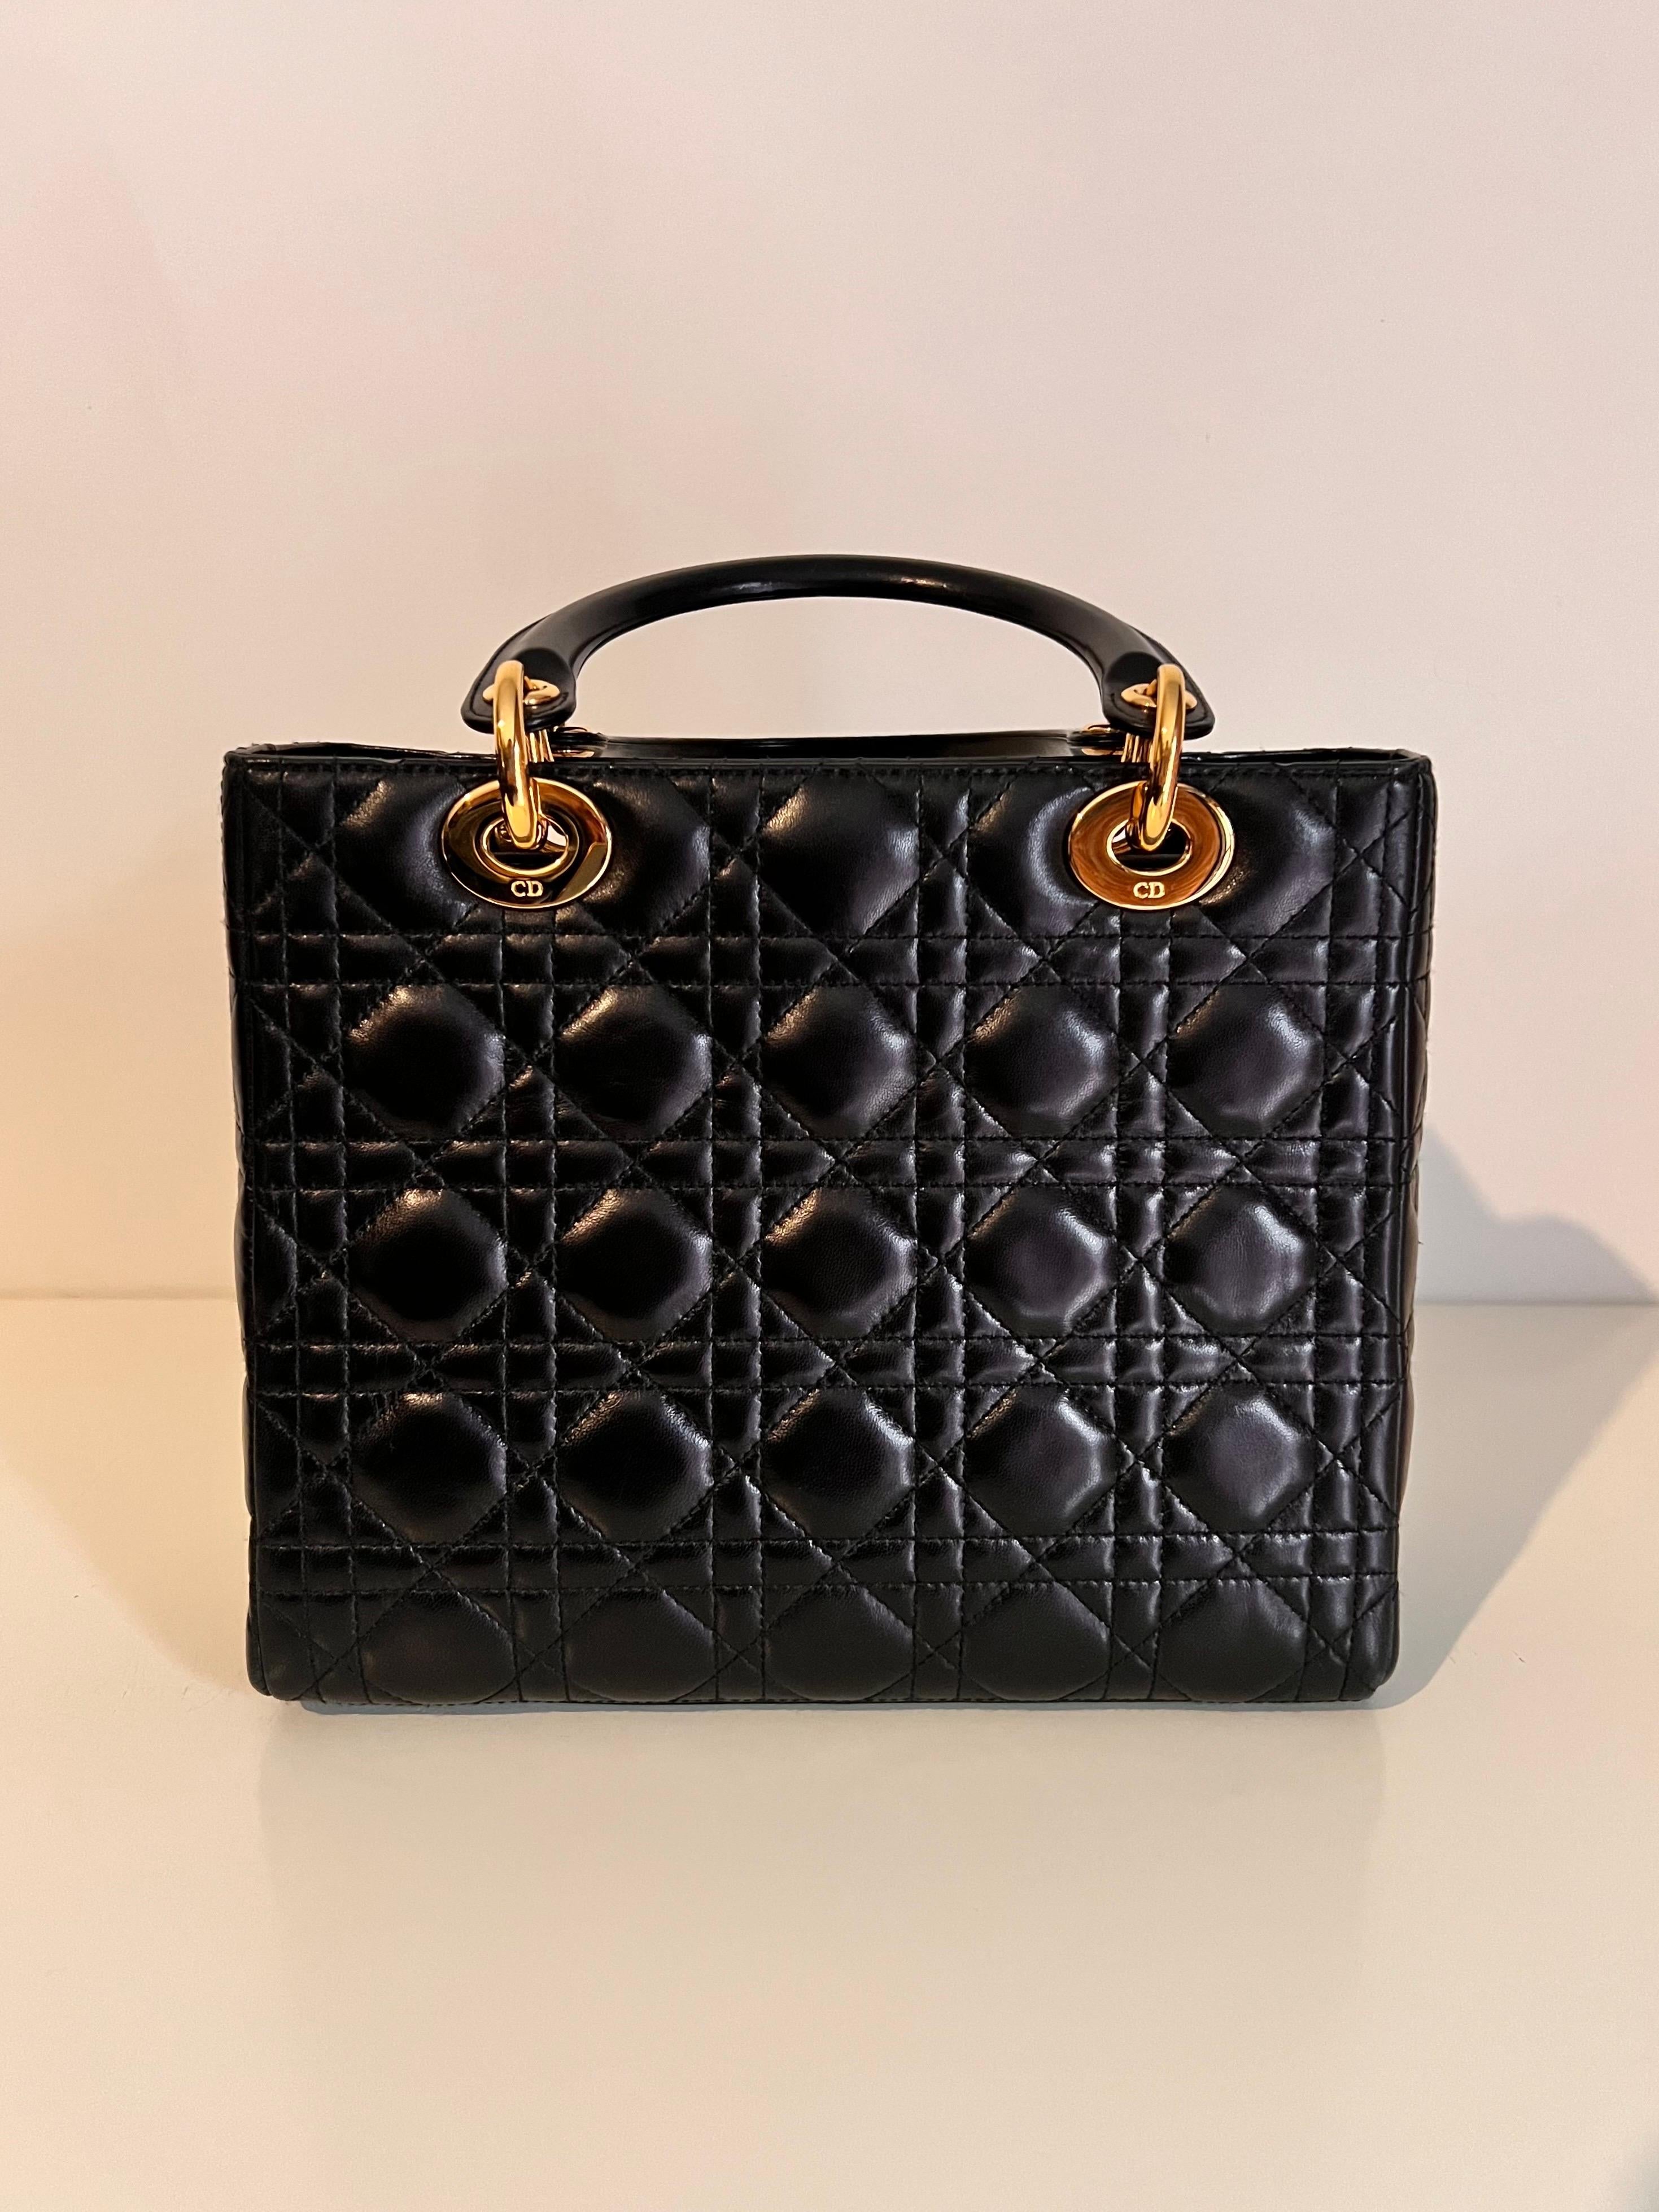 Lady DIOR quilted handbag with gold hardware, famously worn by Princess Diana  12